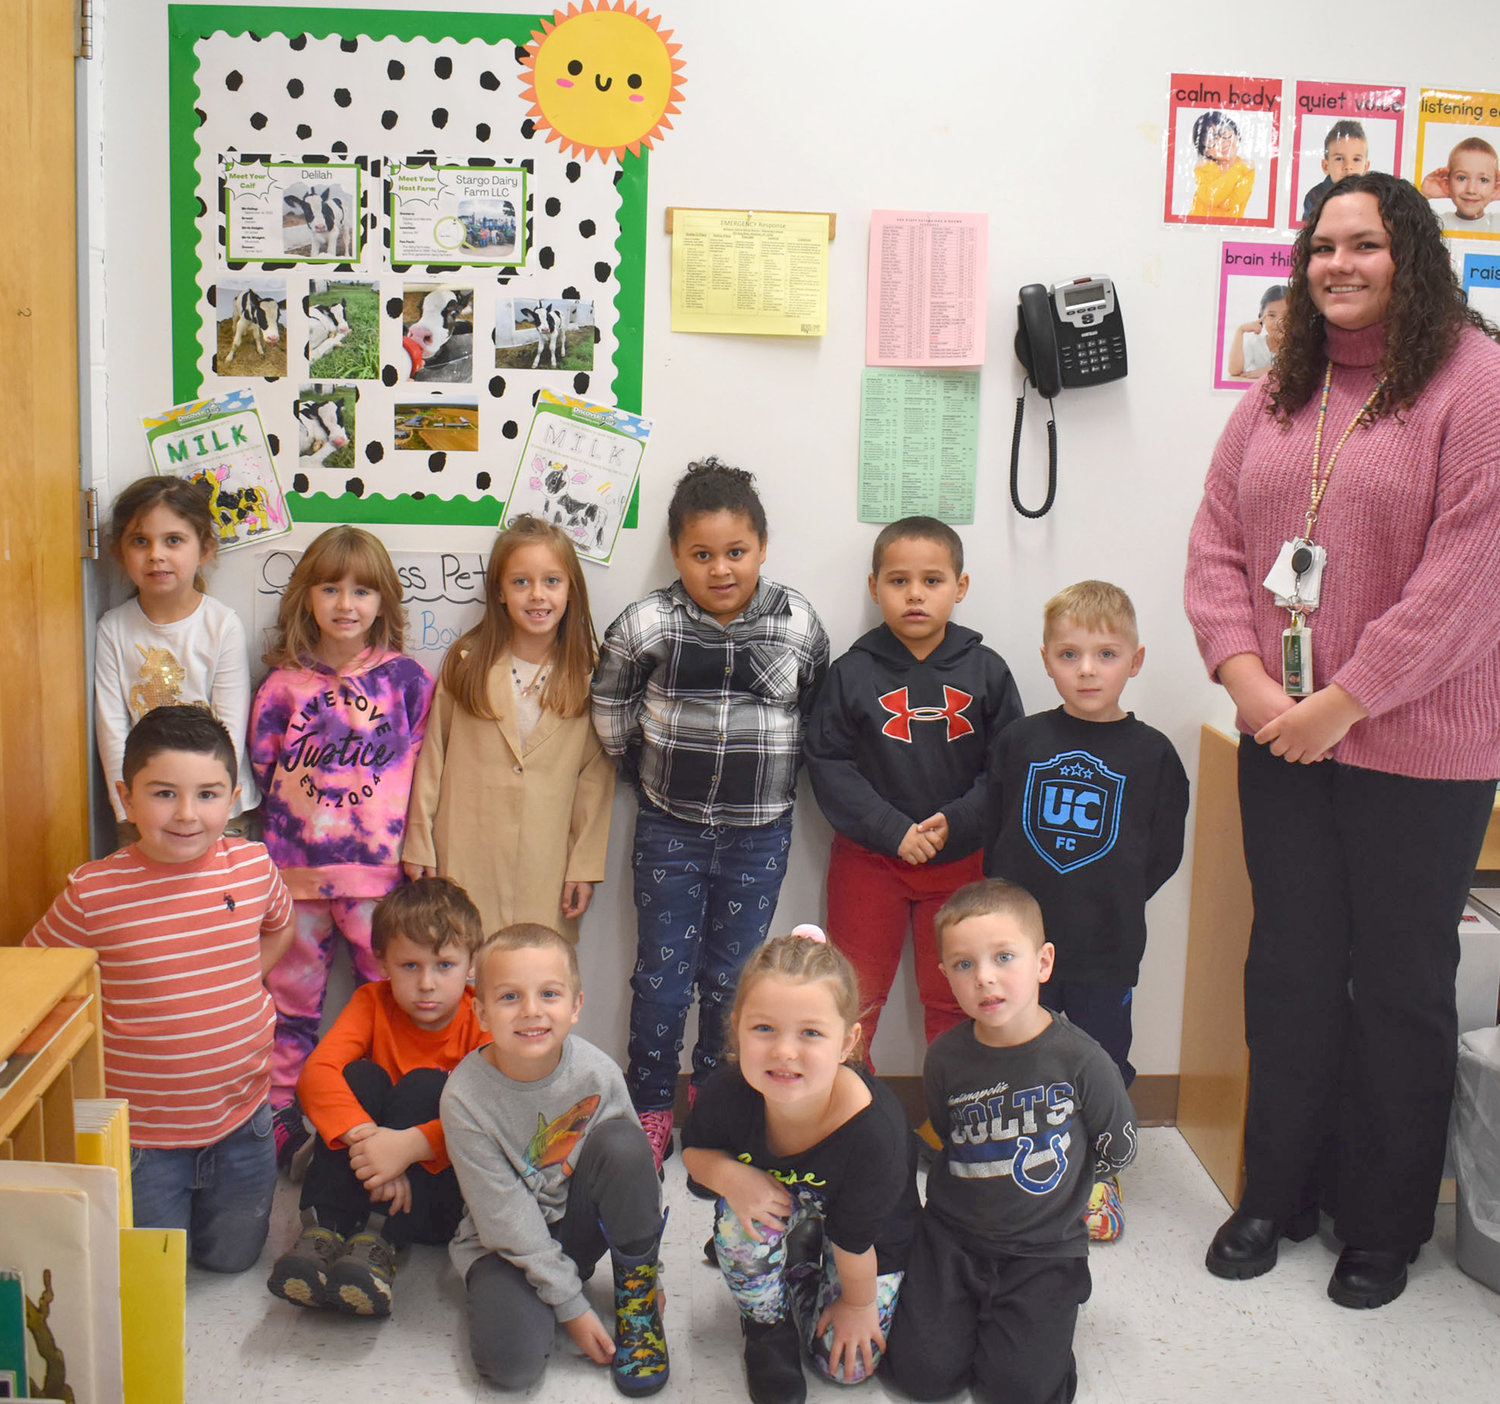 Herkimer Central School District kindergarten teacher Amanda Johnson’s class poses by a display of photos showing a cow named Delilah that the class adopted.